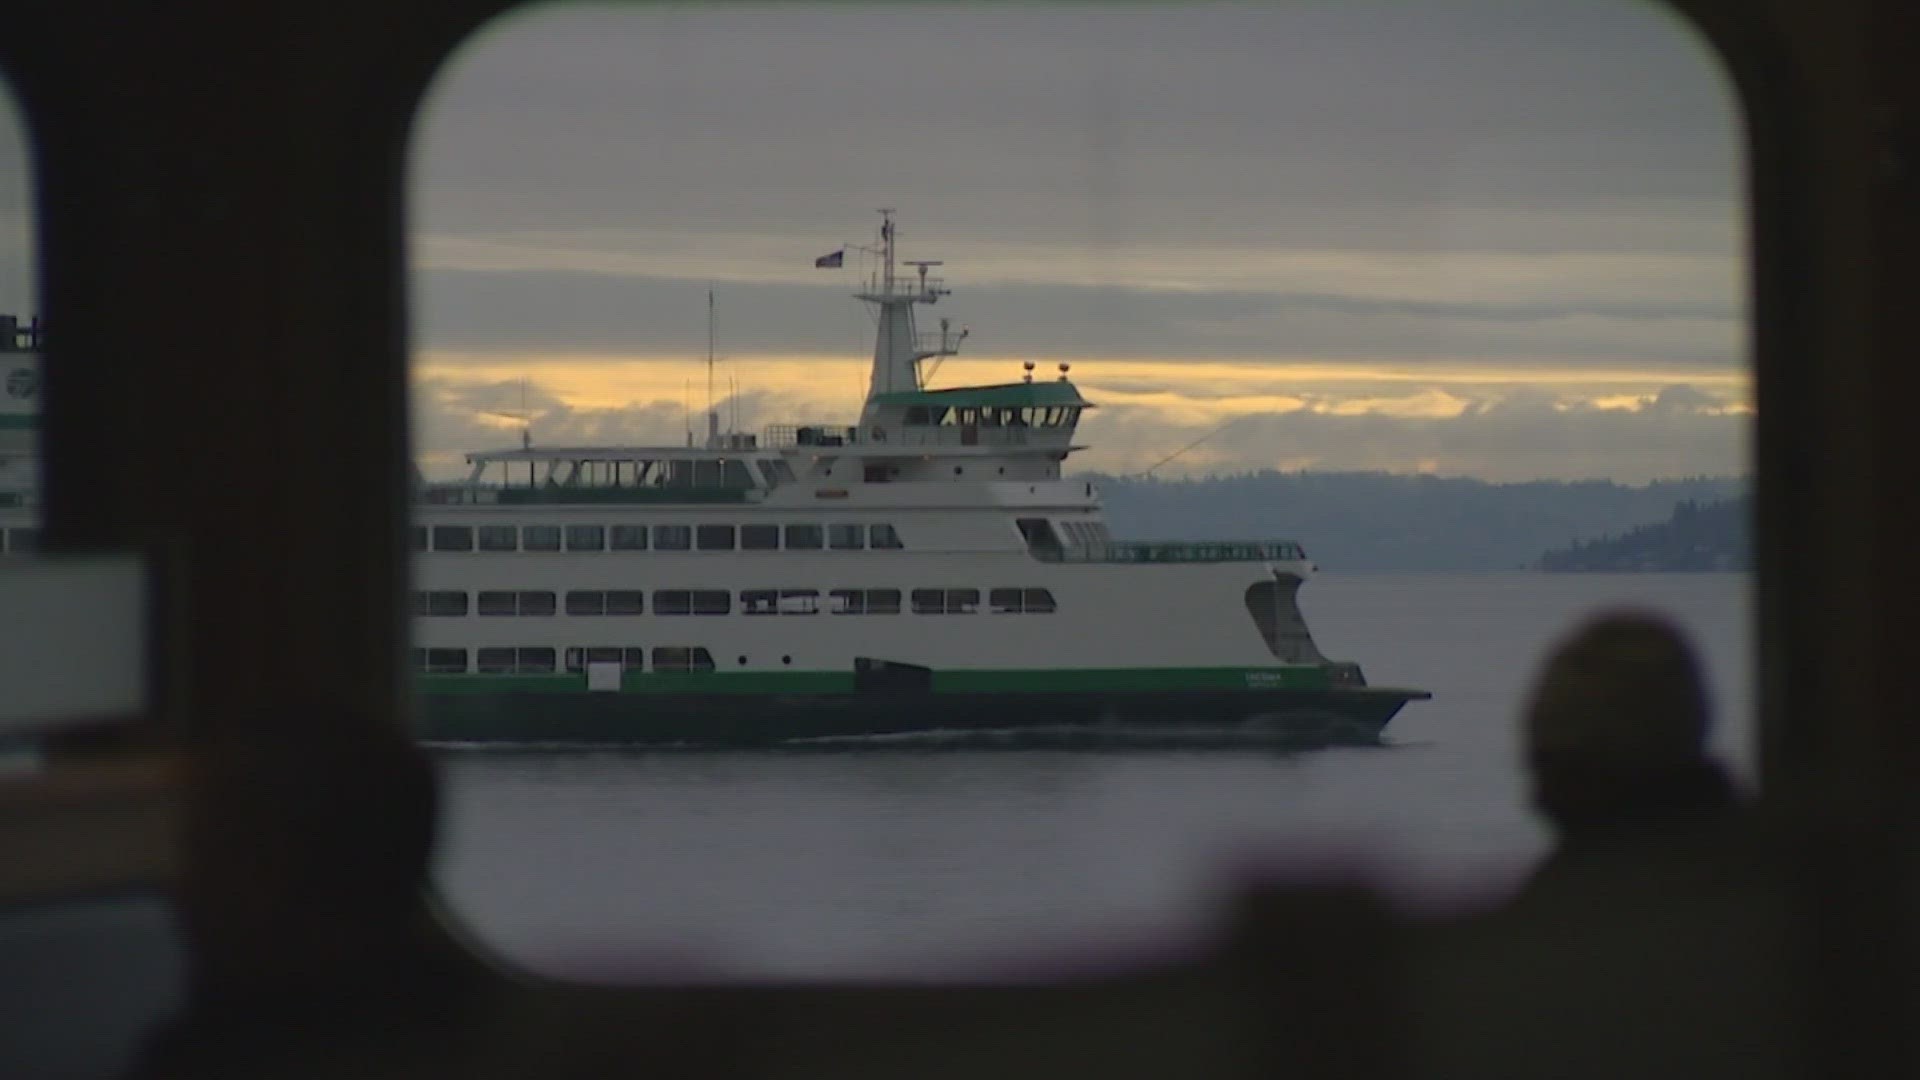 State ferry workers had to rely on backup transaction methods while the outage affected the fare system. All systems are back up and running.